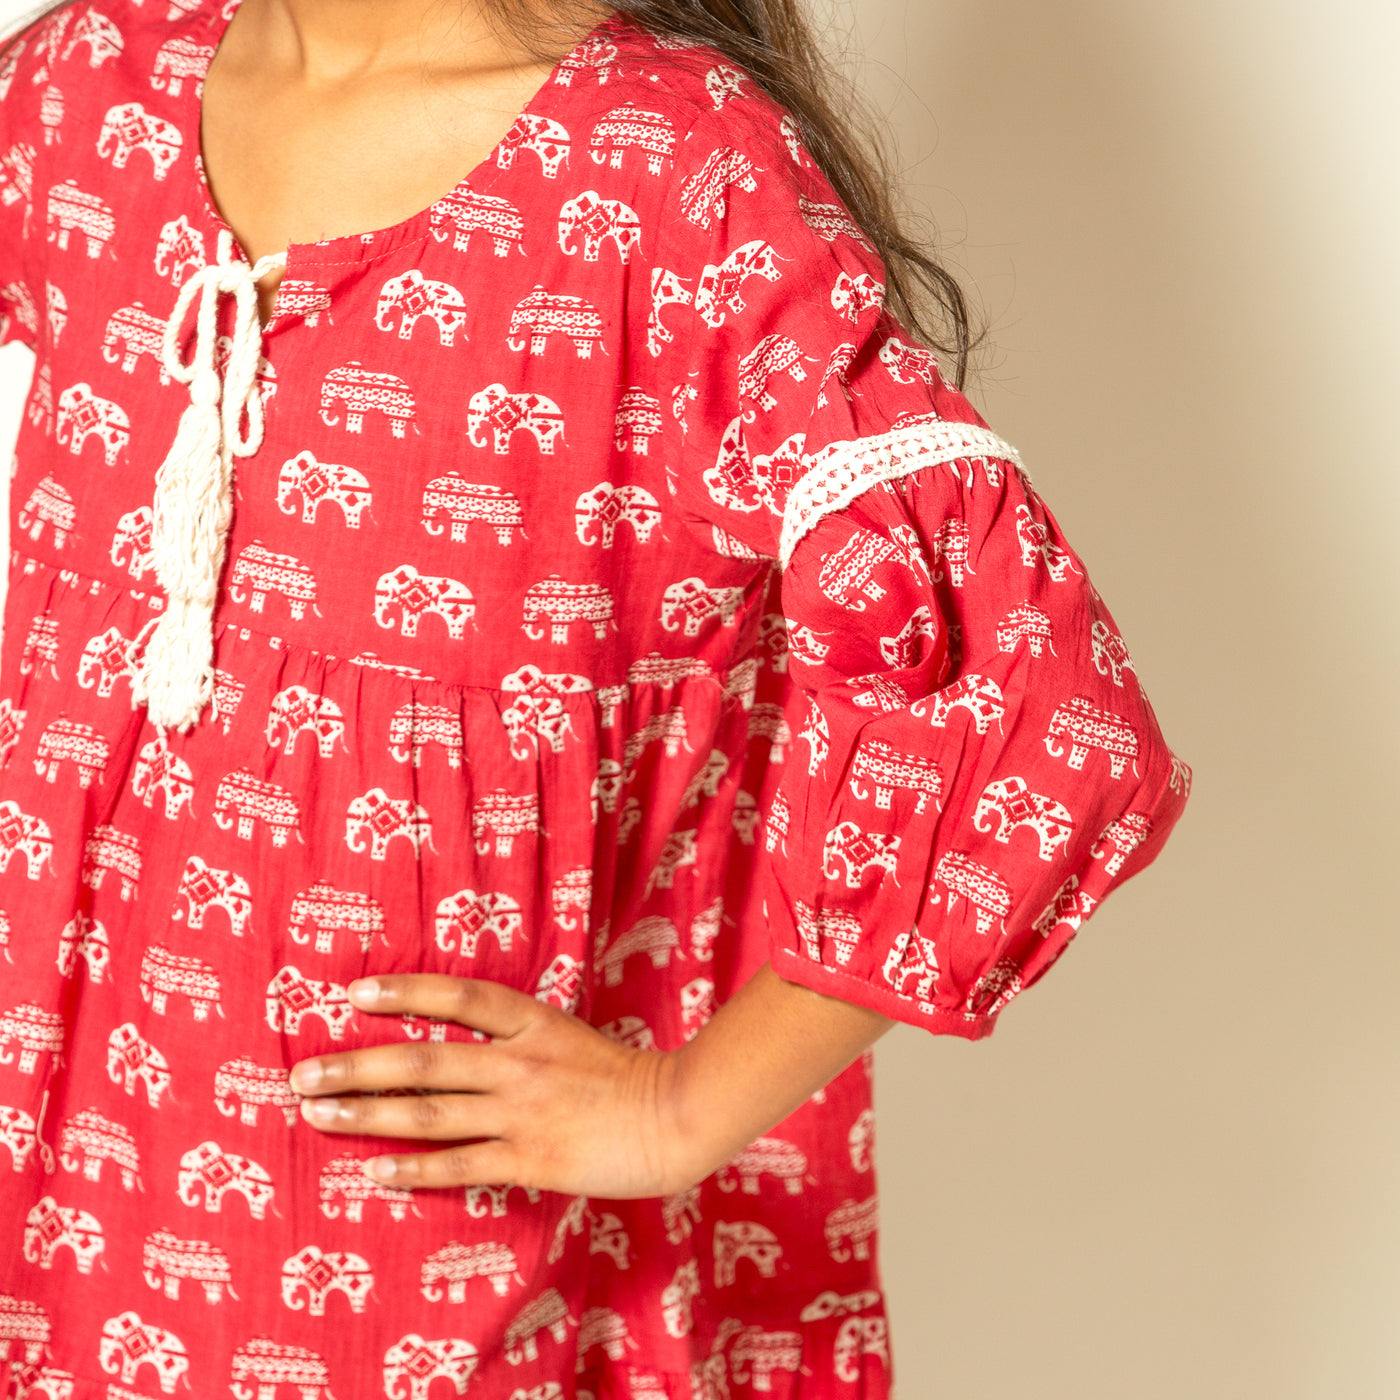 Parina - Girls Red Elephant Tier Dress with Crochet Lace